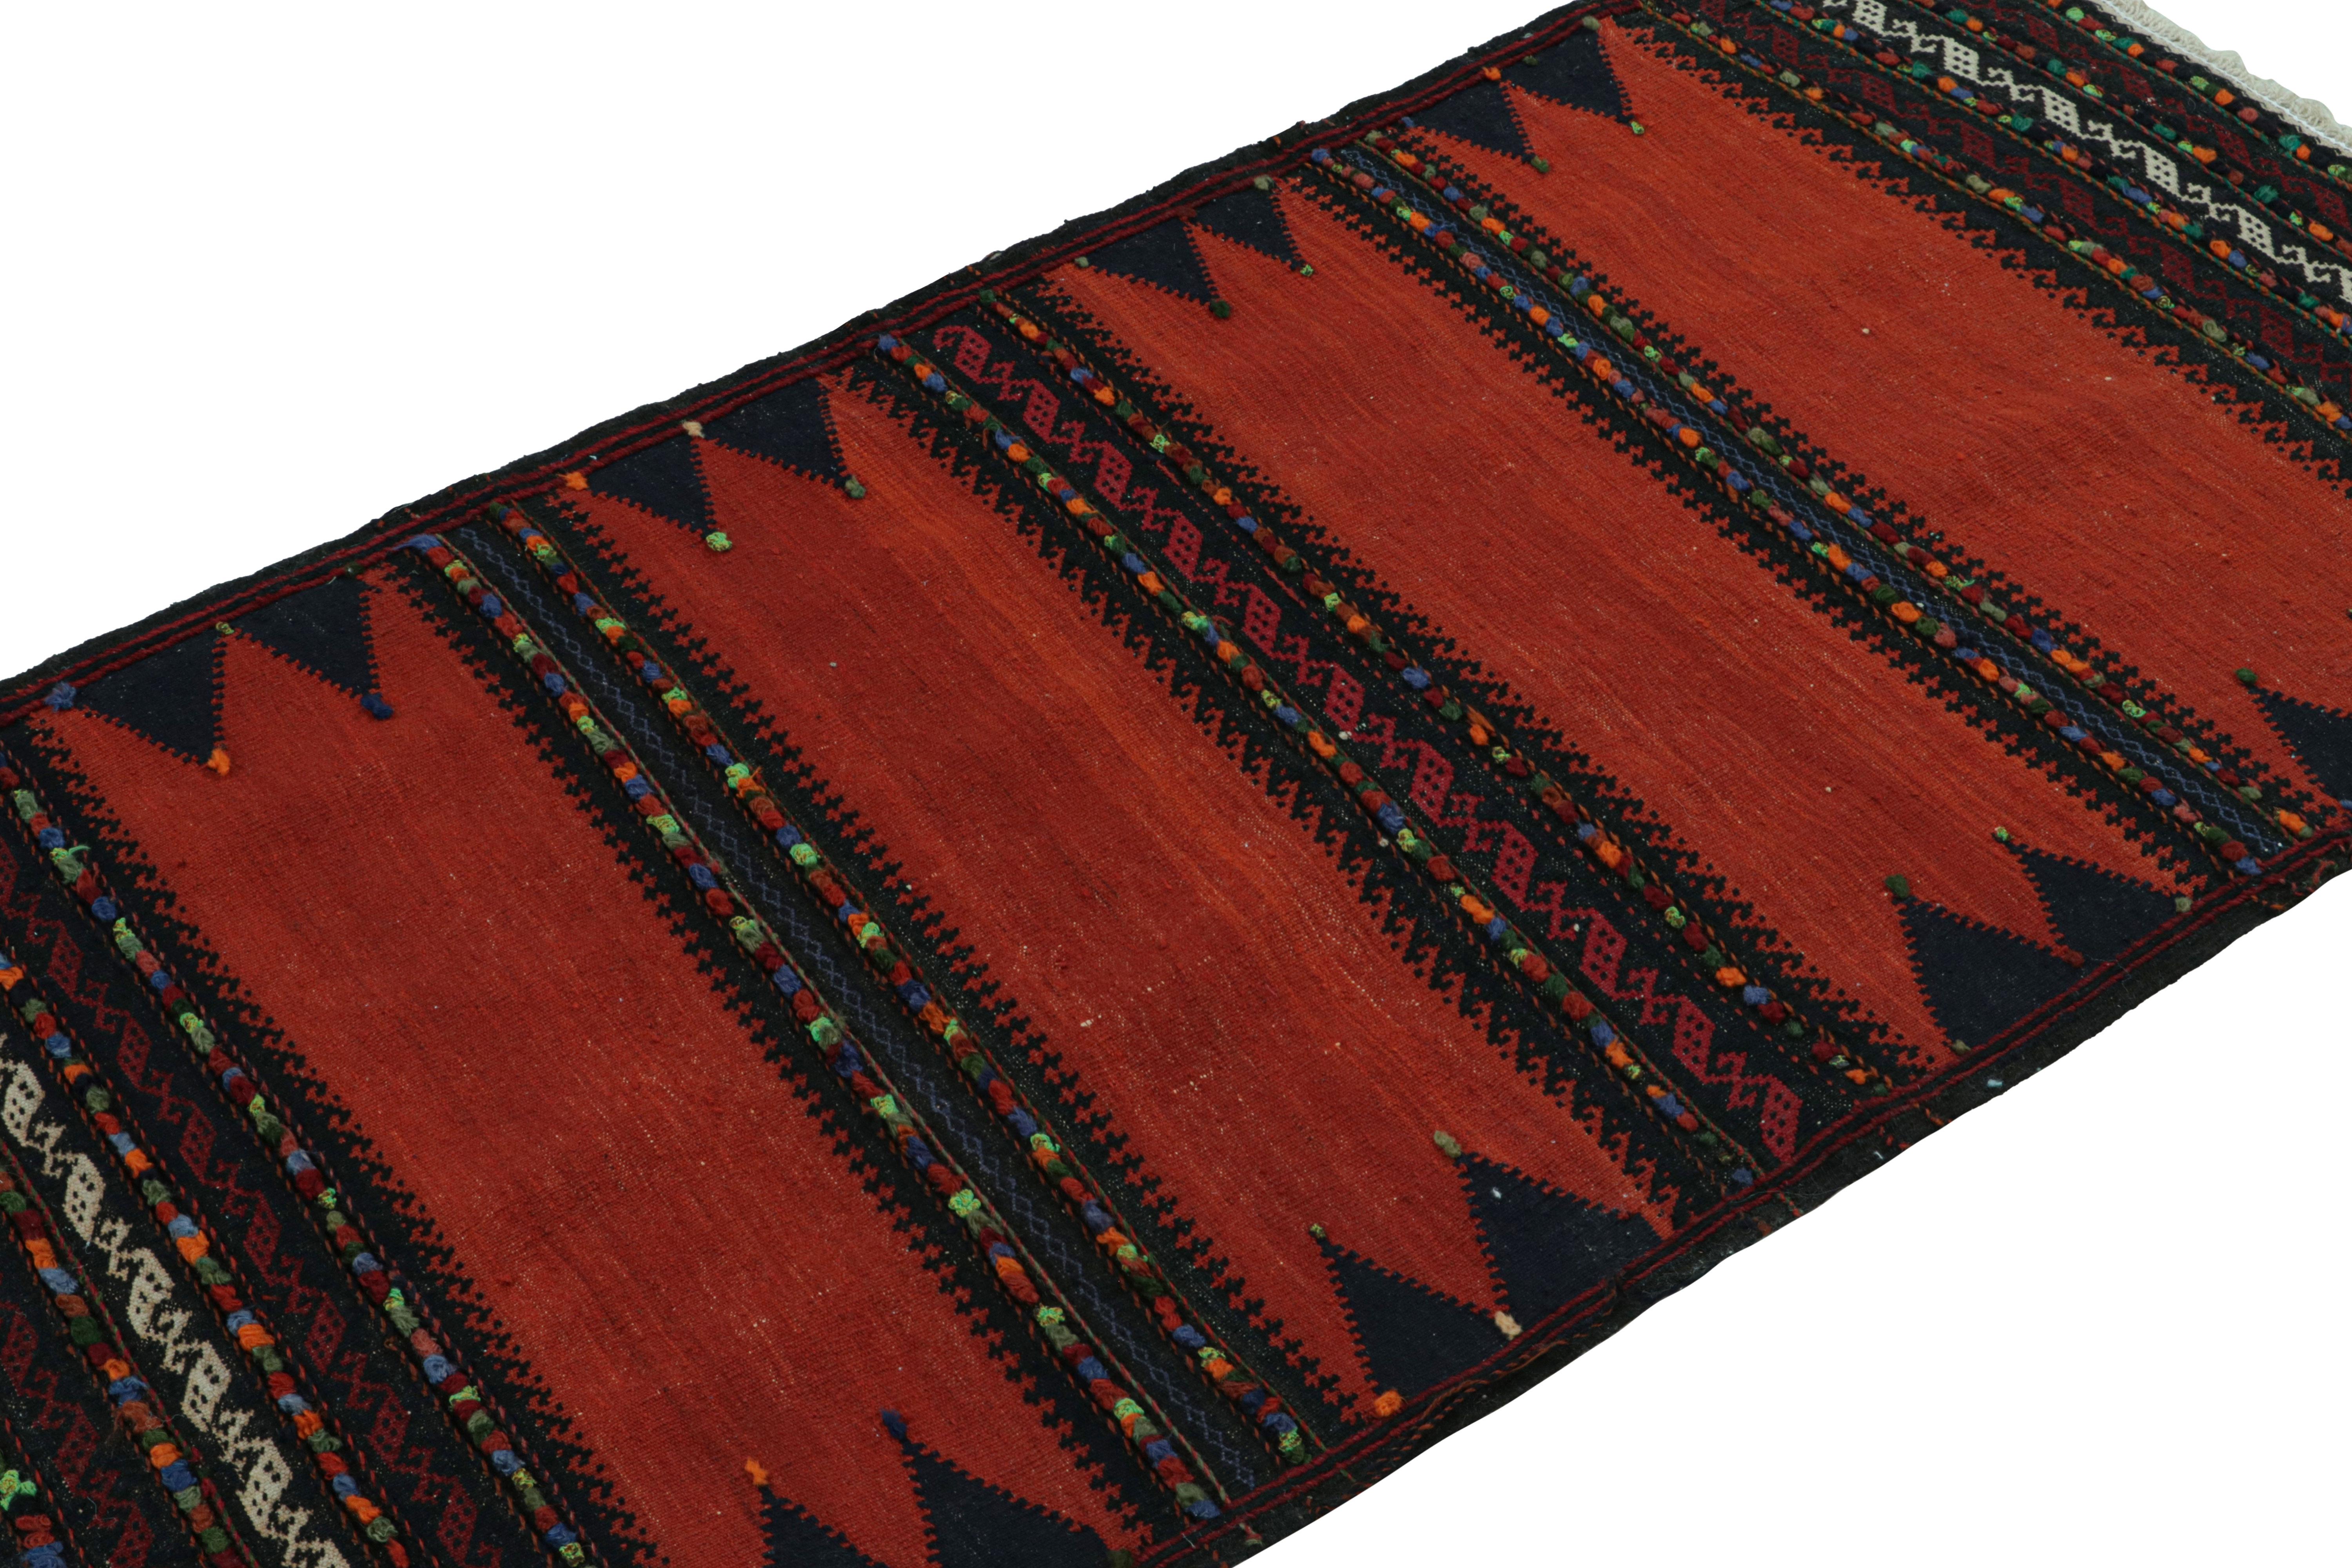 Handwoven in wool, this 3x5 vintage Afghan tribal kilim scatter rug, circa 1950-1960, is an exquisite tribal addition to the Rug & Kilim collection.  

On the Design: 

Drawing on Afghan tribal sensibilities, this archaic piece of art exhibiting an